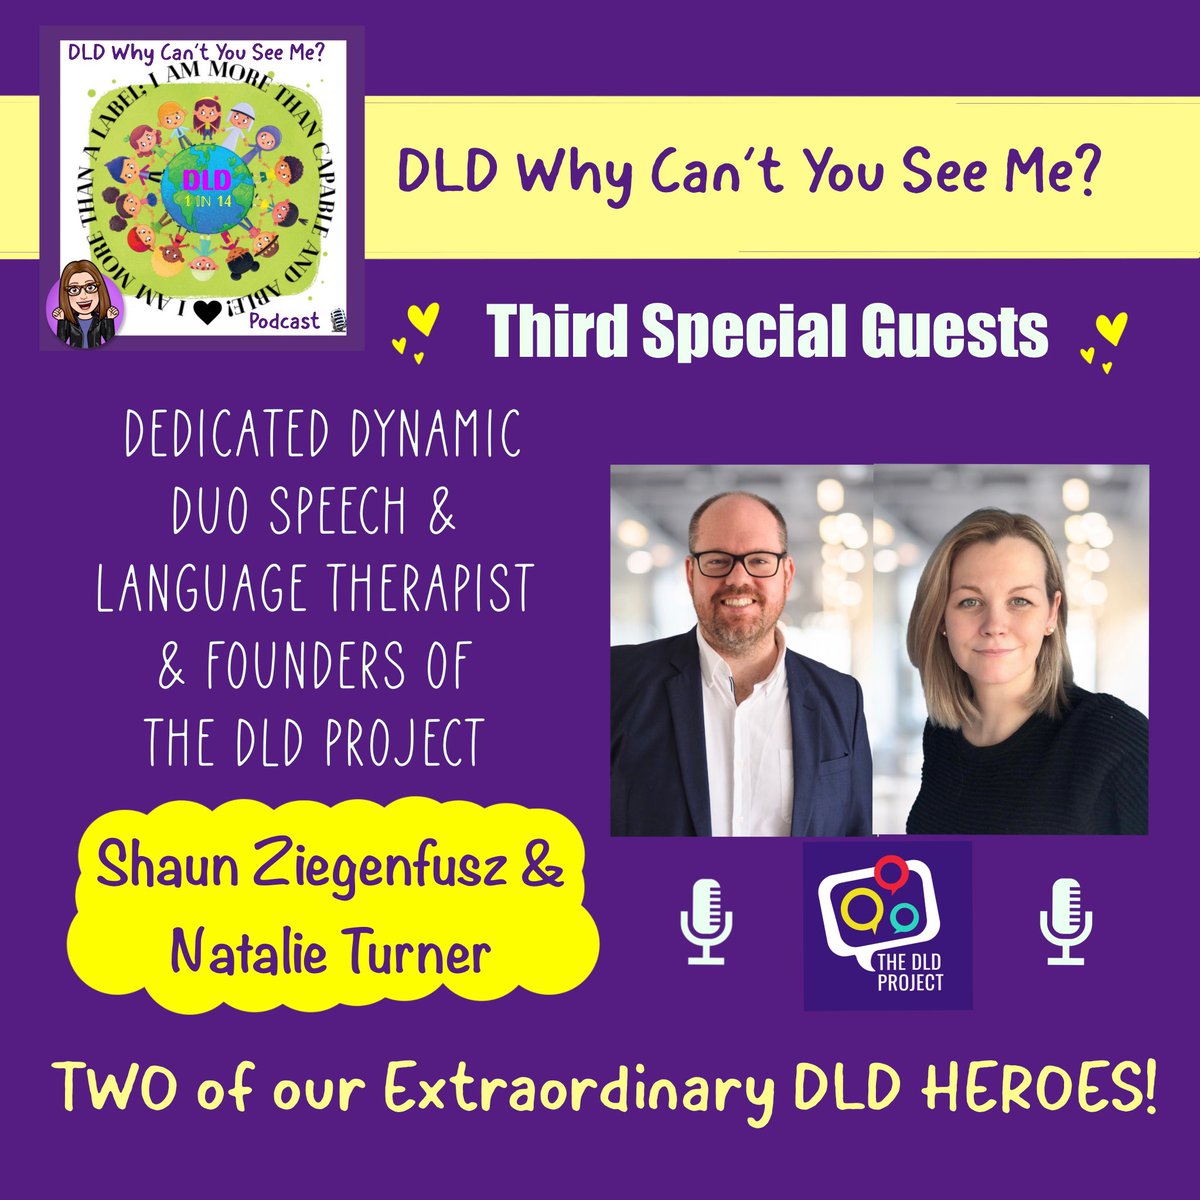 🗣️ TOMORROW Ep. 3 will be out 💜 TWO special guests @TheDLDProject_ 👏🏻👏🏻💜 thedldproject.com/what-about-dld/ #podcast #youtube #dldwhycantyouseemepodcast #devlangdis #Advocacy